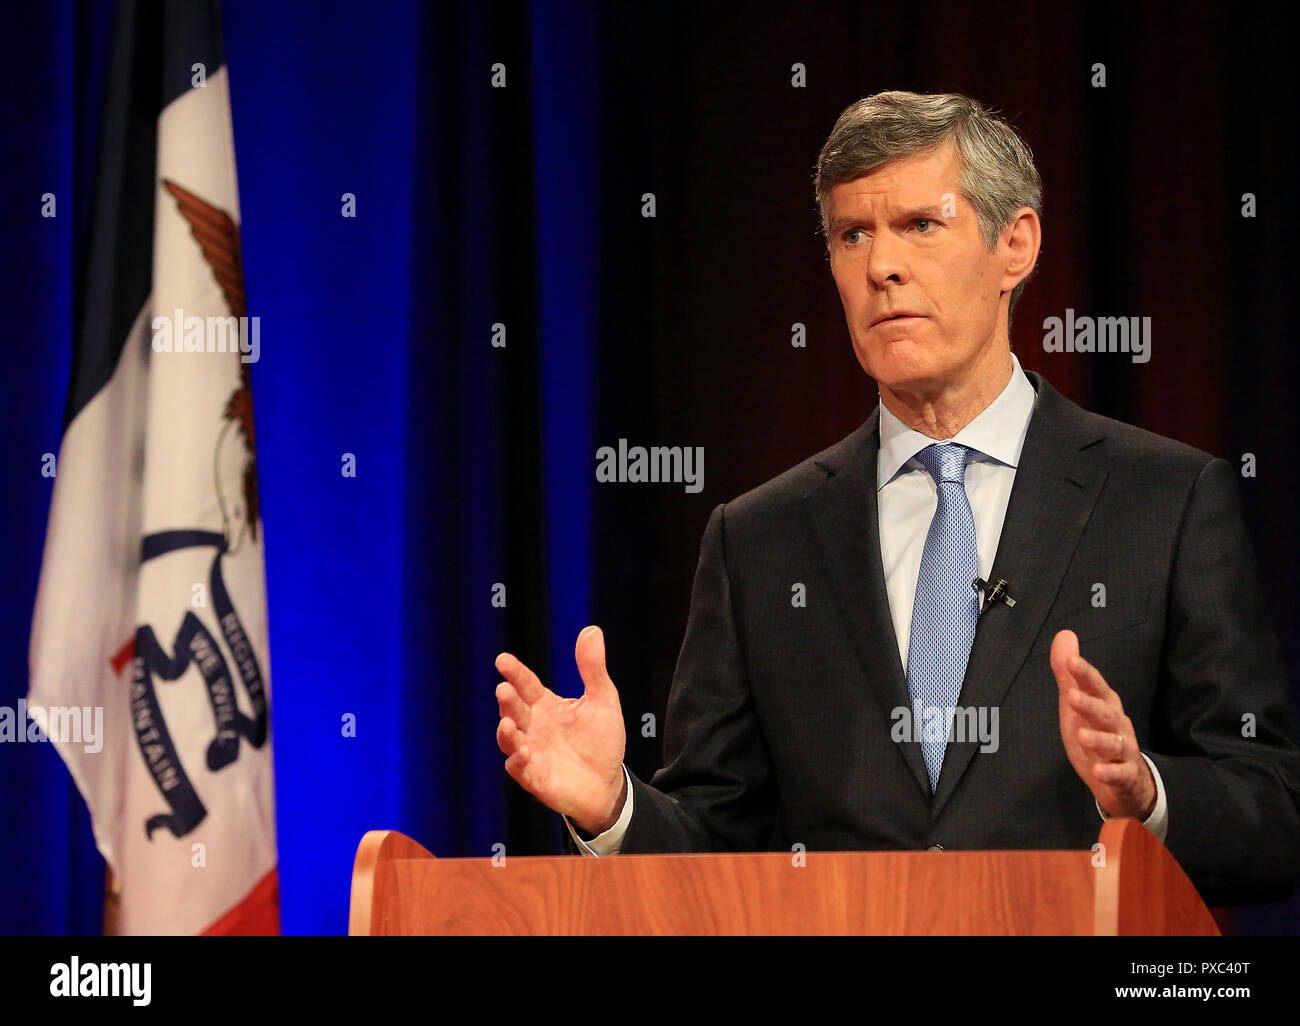 Davenport, Iowa, USA. 21st Oct, 2018. Democratic candidate for Governor Fred Hubbell responds to a question during the last of three debates Sunday morning, October 21, 2018 in the KWQC studios in Davenport, Iowa. Credit: Kevin E. Schmidt/Quad-City Times/ZUMA Wire/Alamy Live News Stock Photo